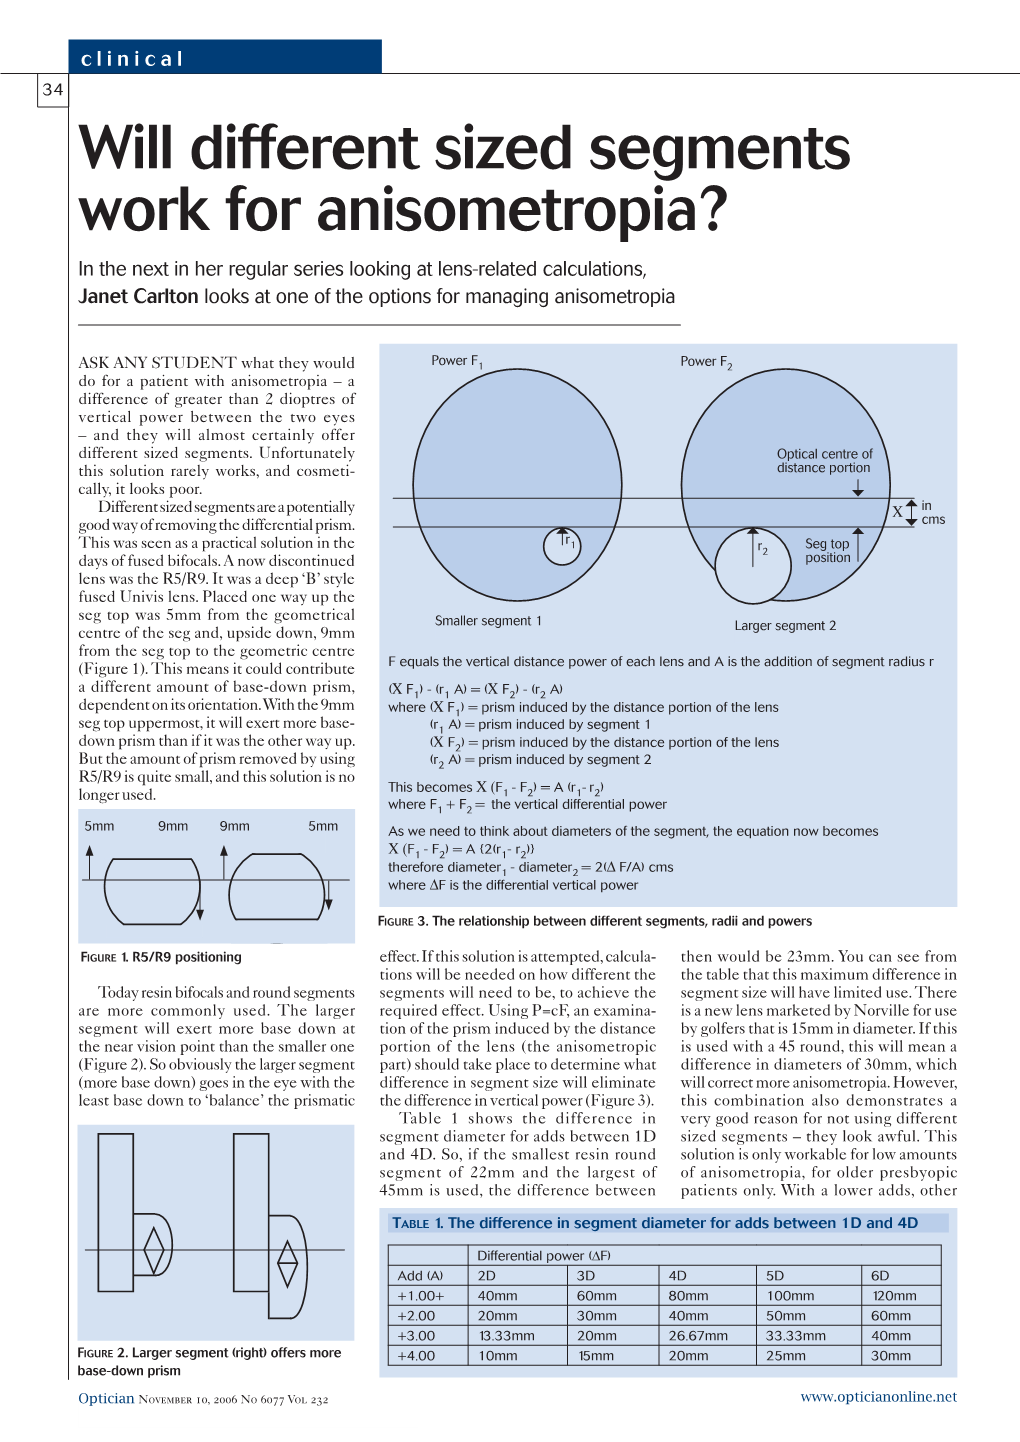 Will Different Sized Segments Work for Anisometropia?